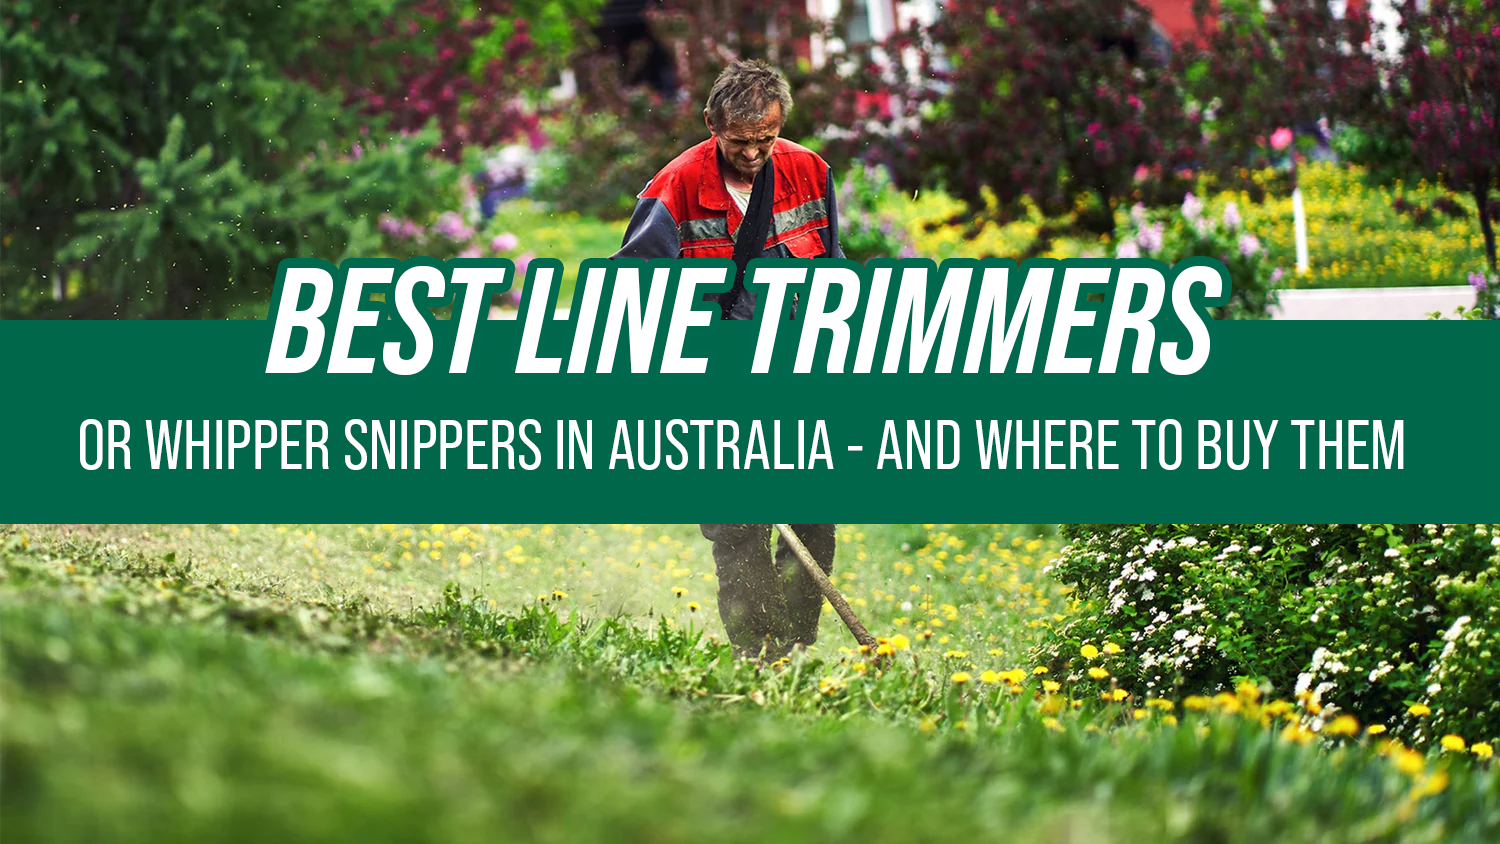 Best Line Trimmers / Whipper Snippers in Australia - and Where to Buy Them